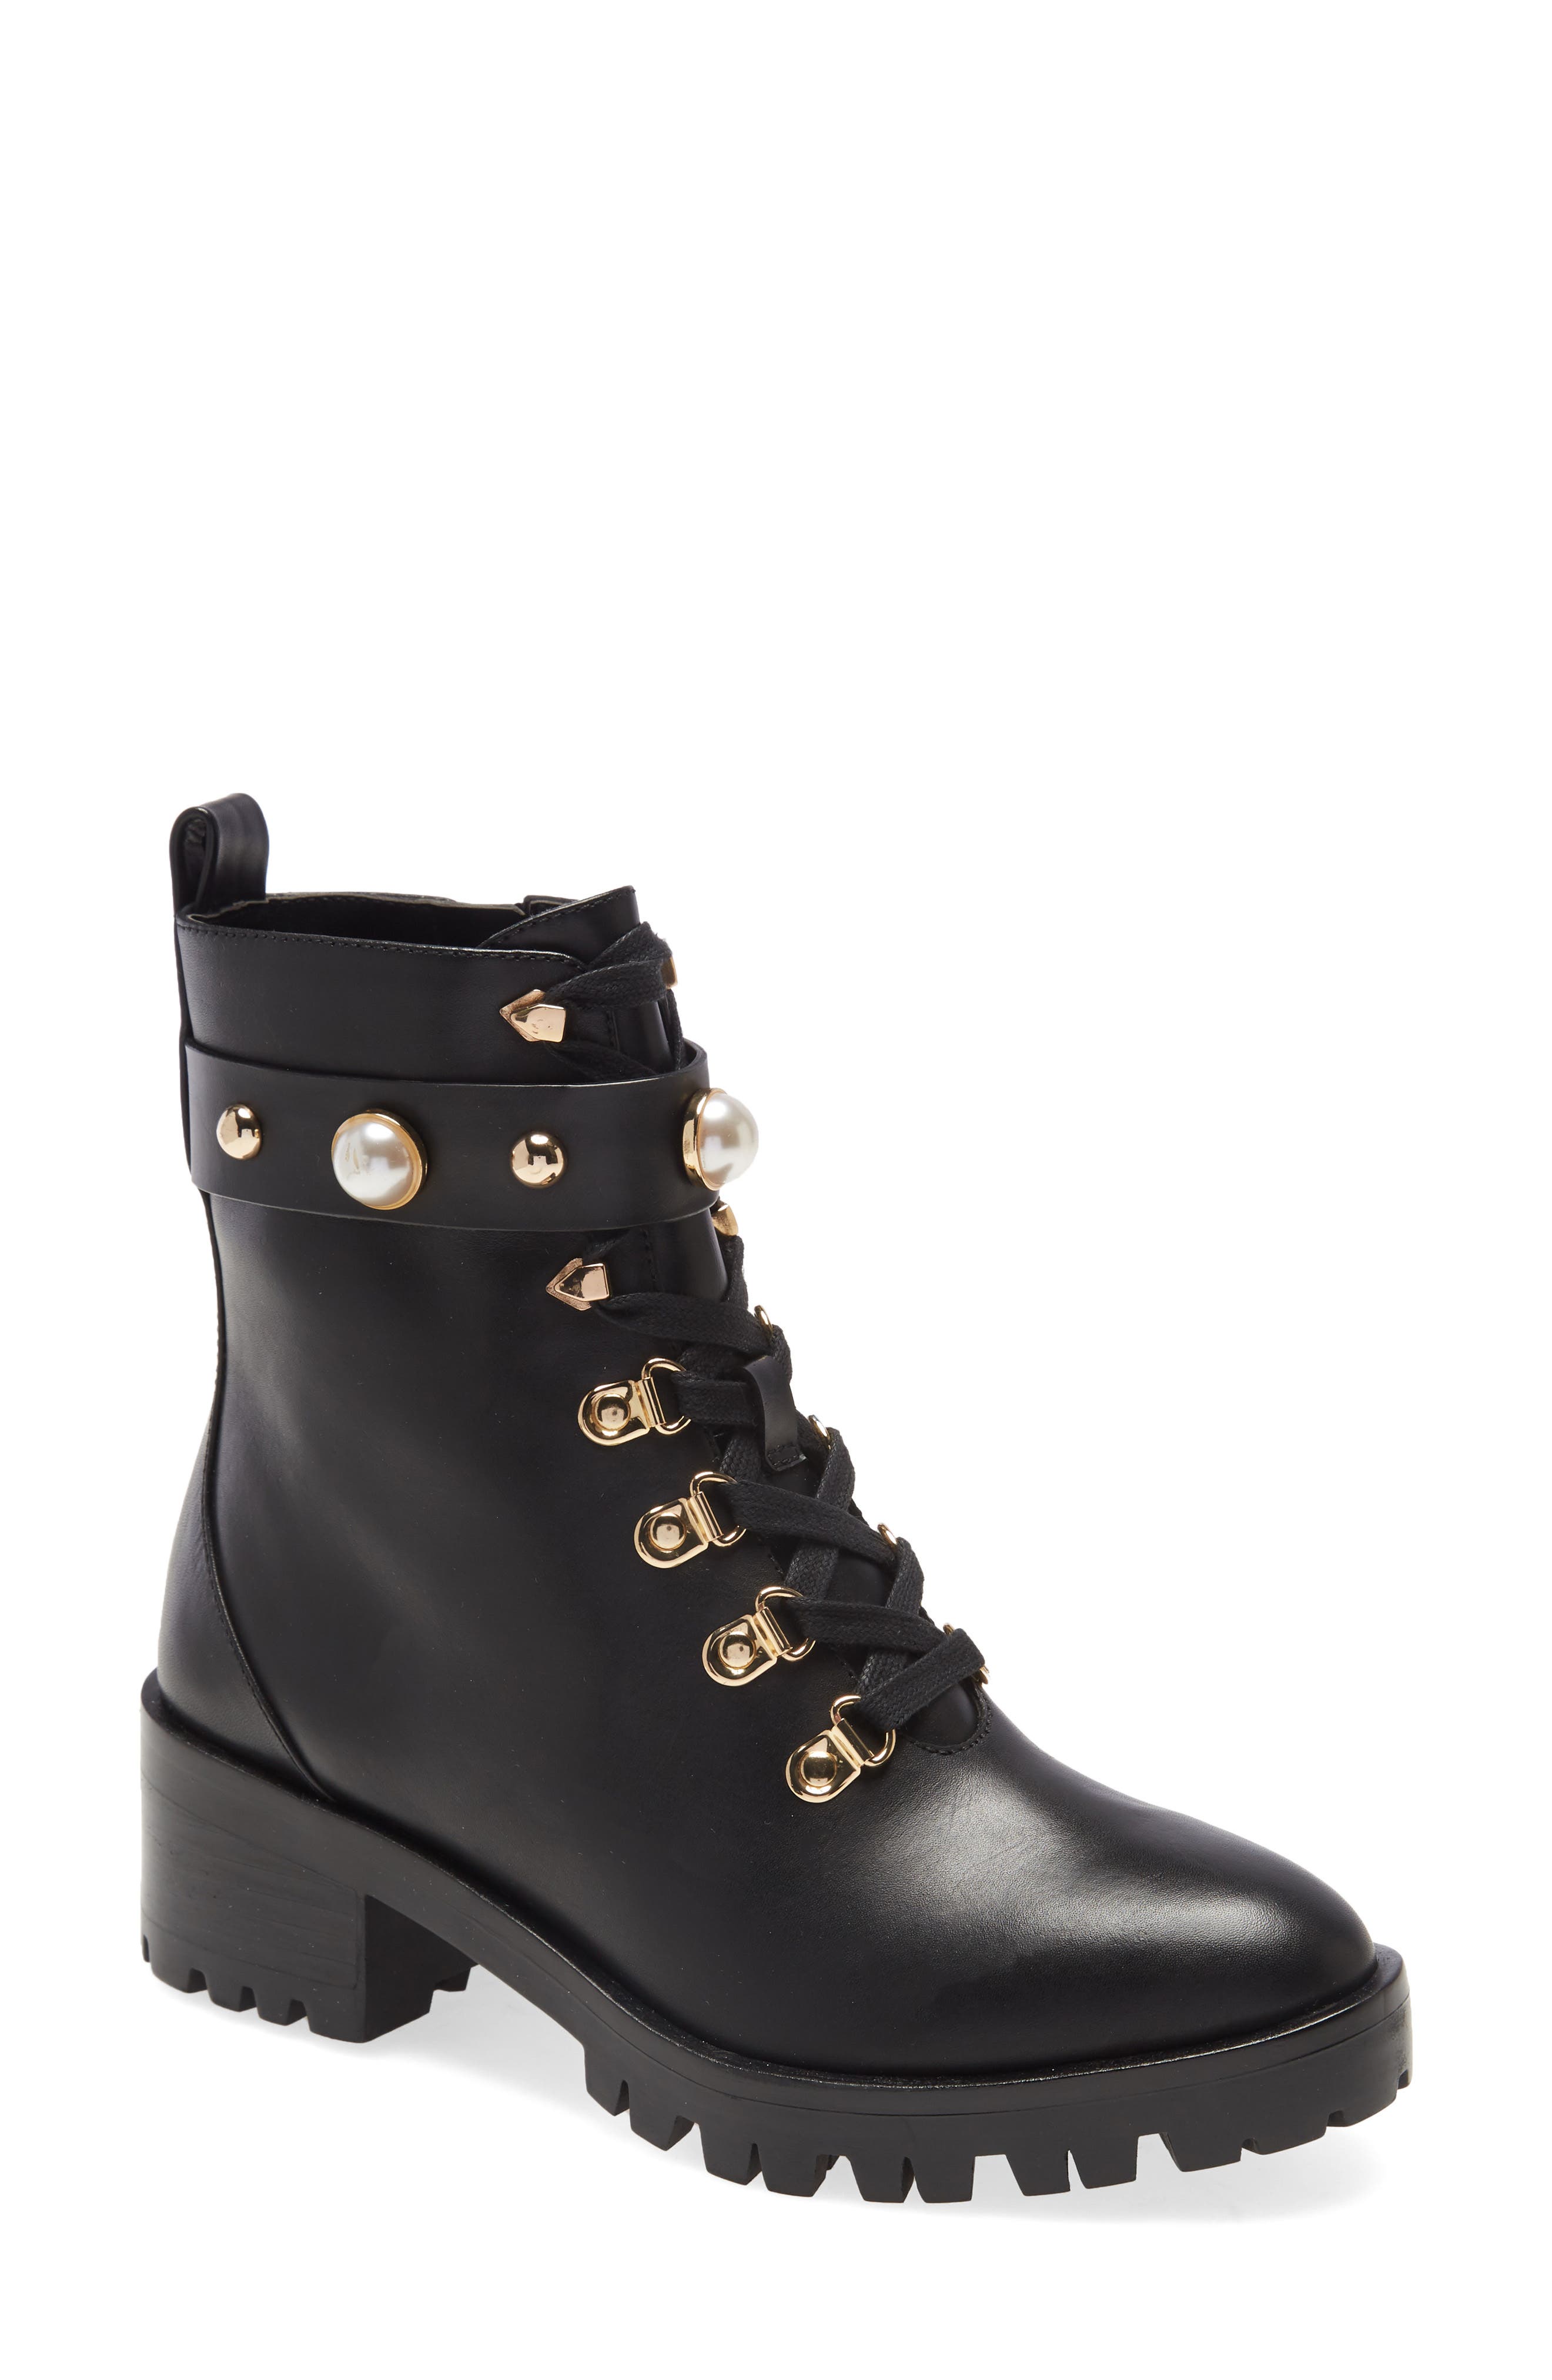 karl lagerfield boots